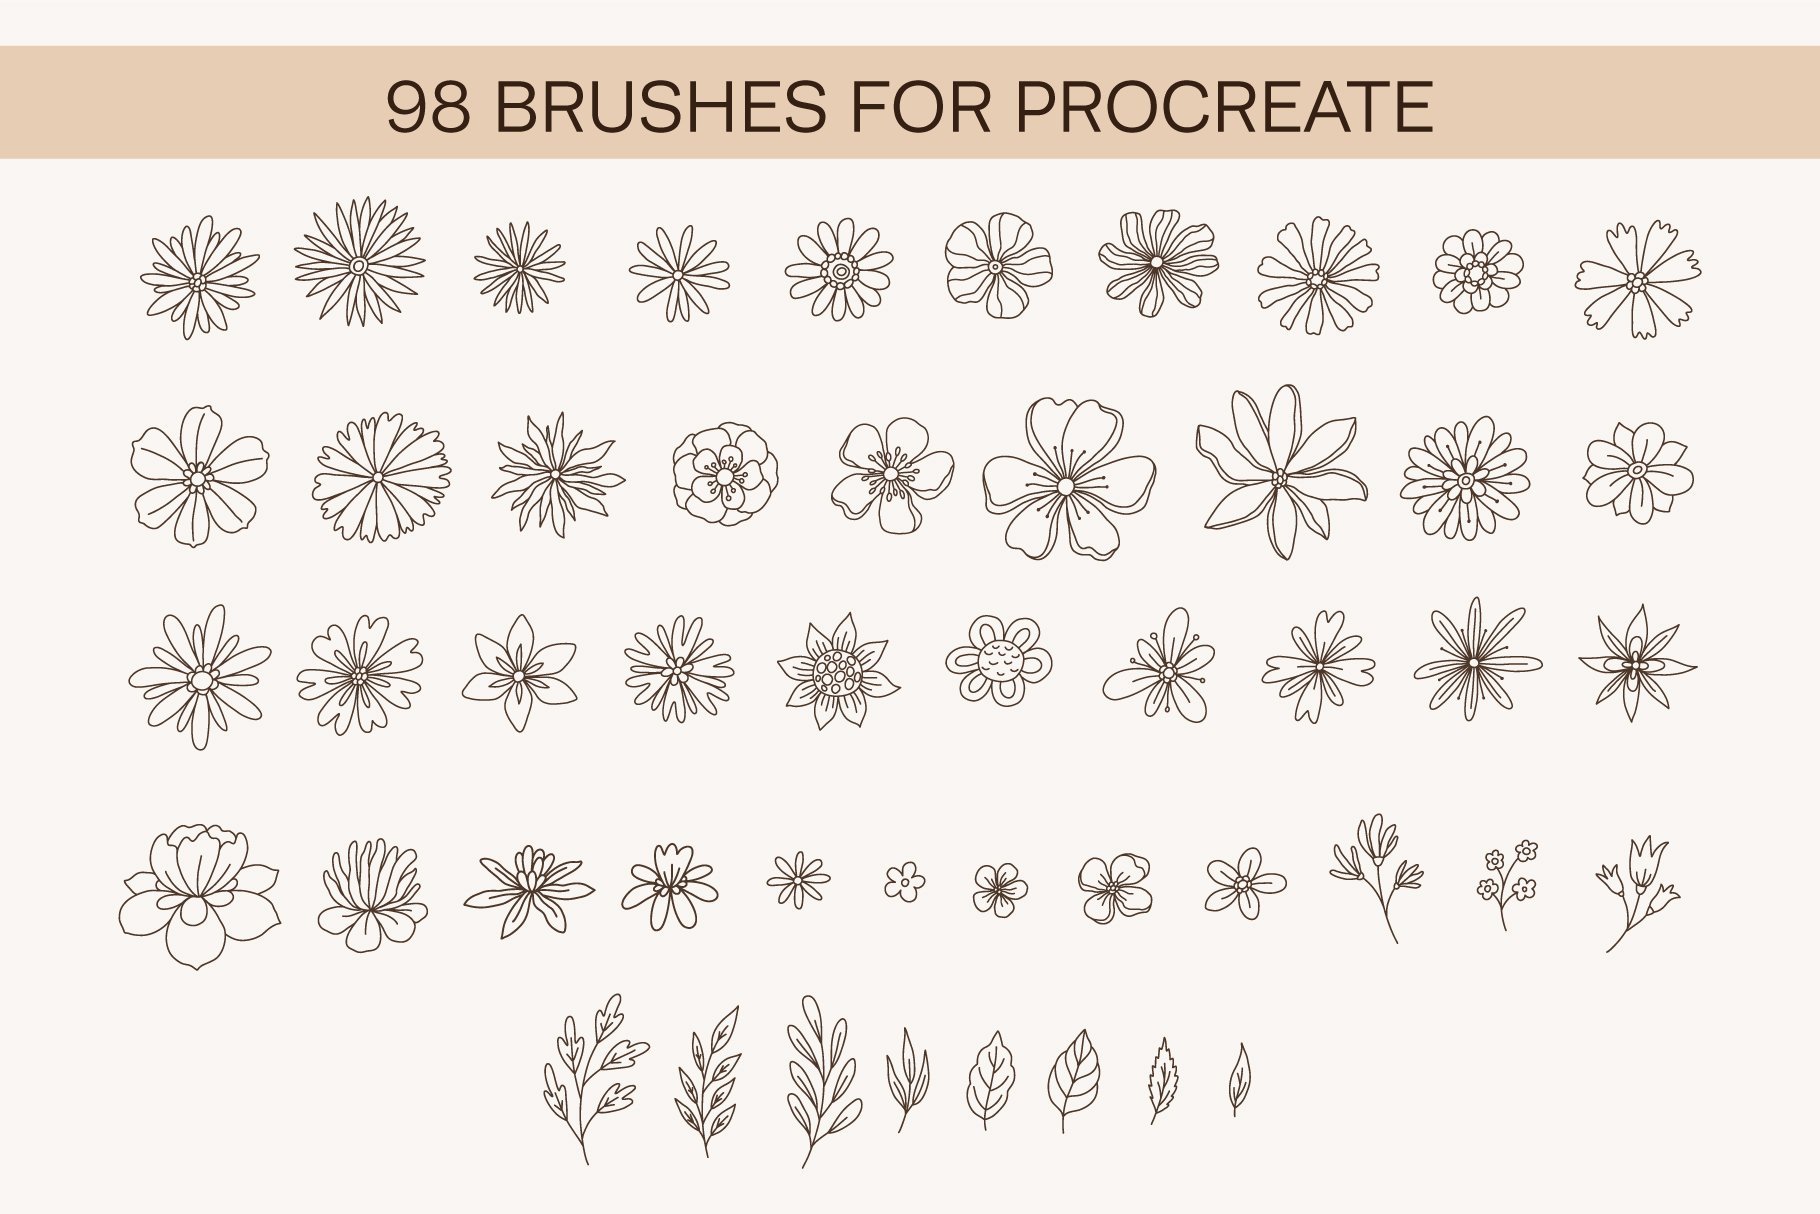 groovy retro flowers stamp brushes 3 14